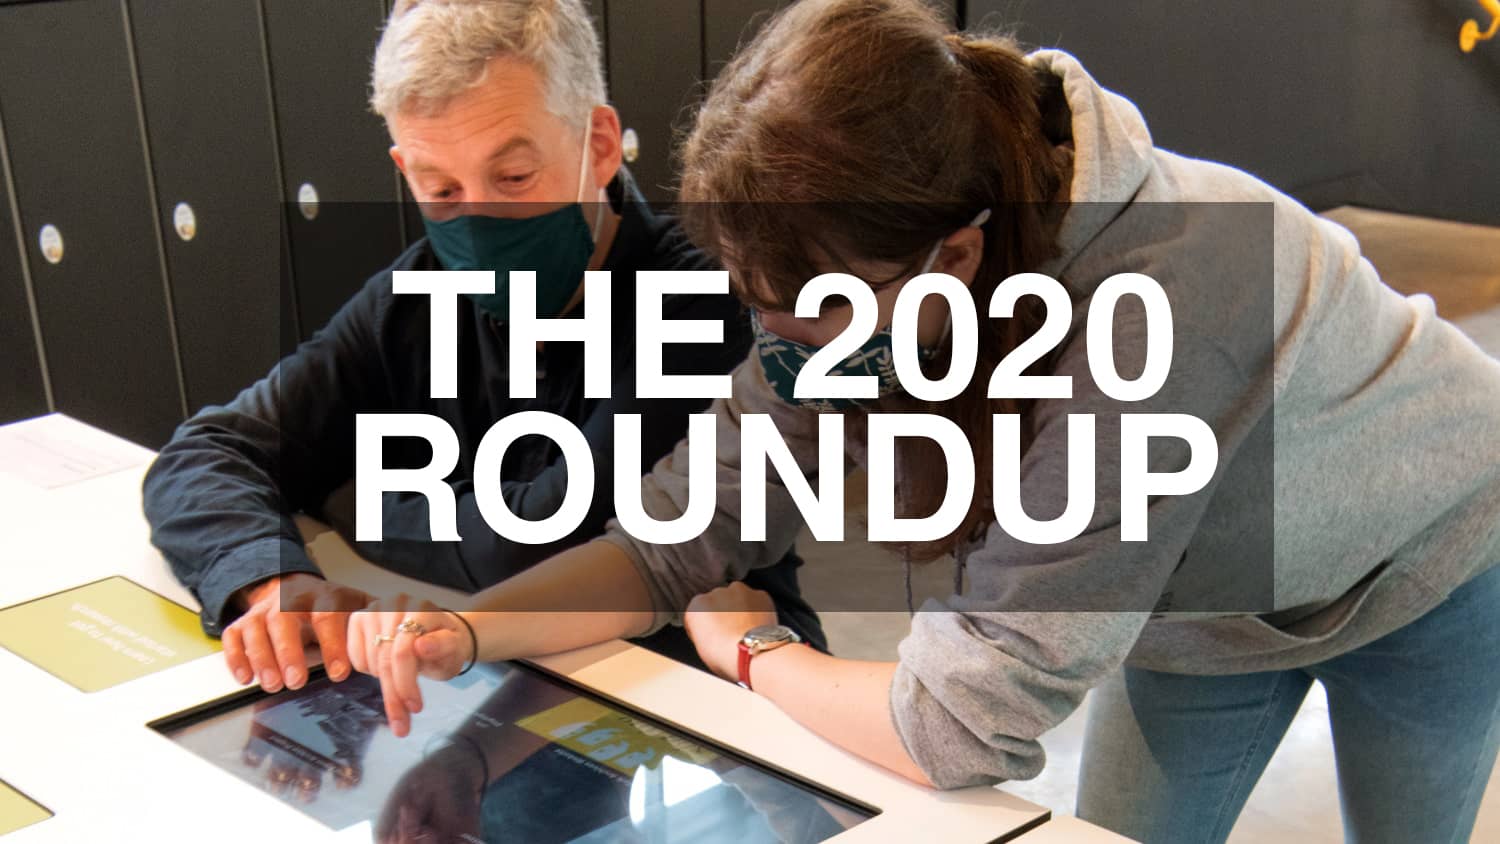 The 2020 Roundup